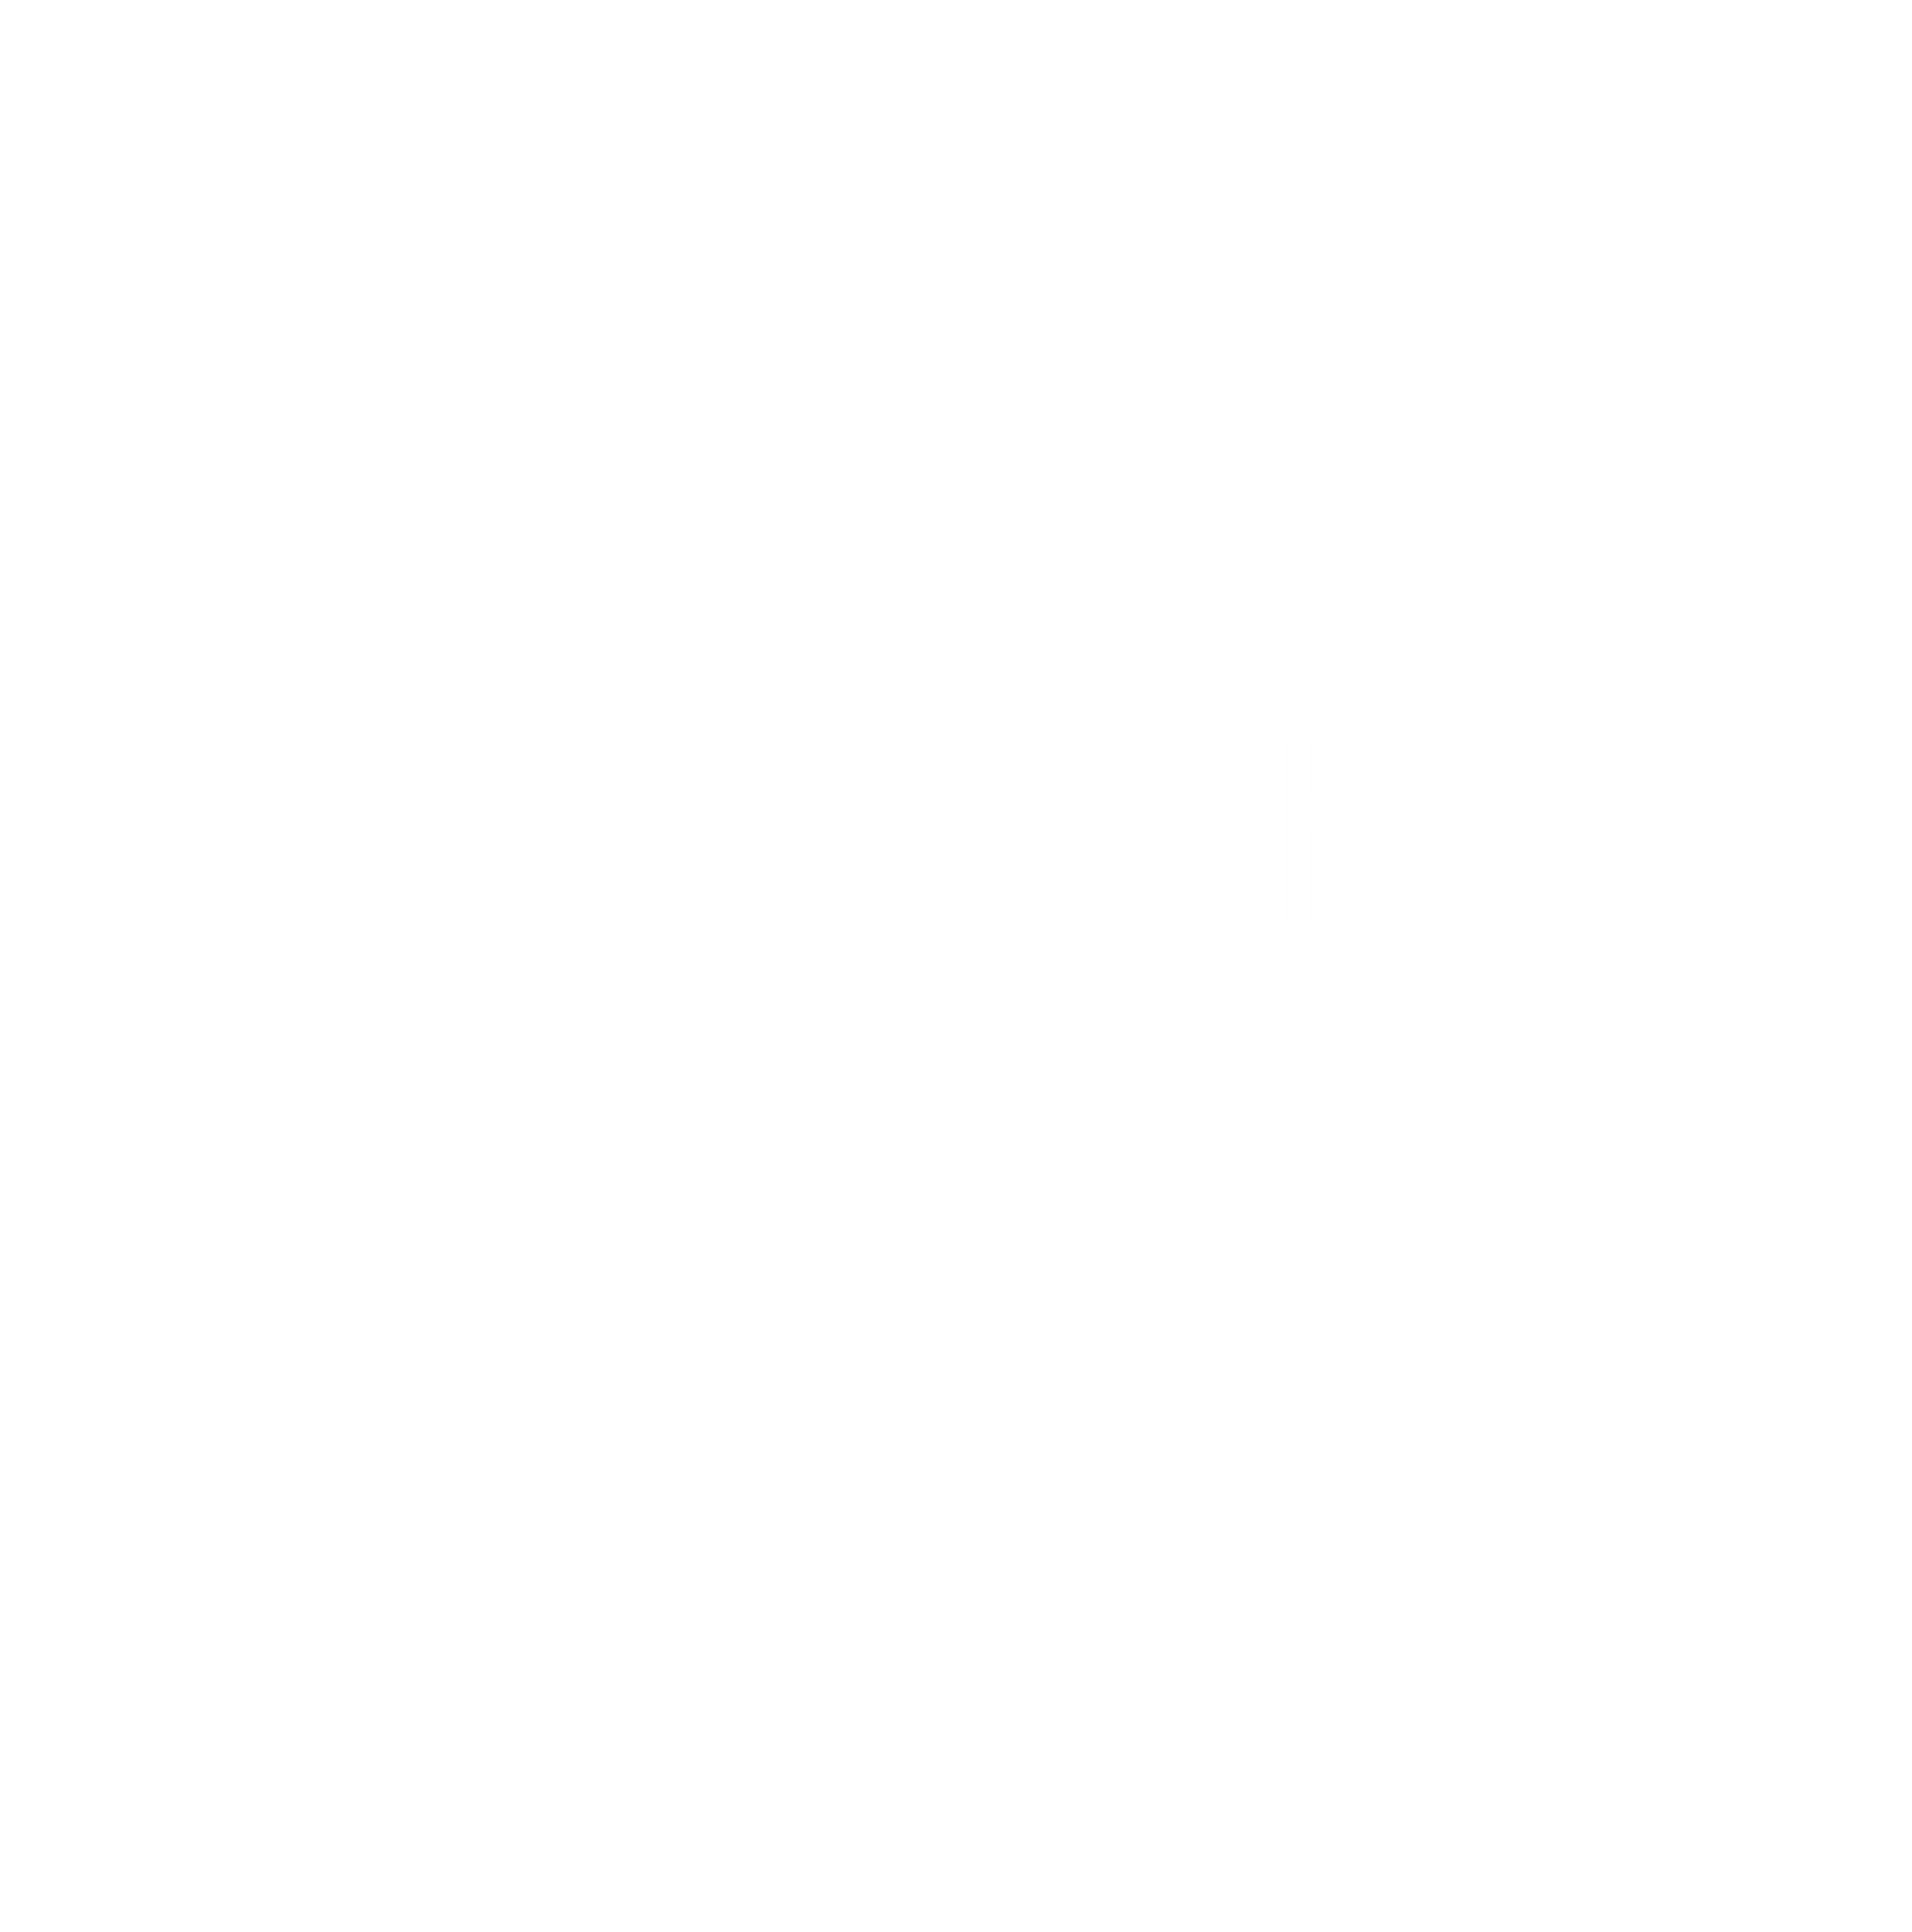 Turquoise Sky Events Logo